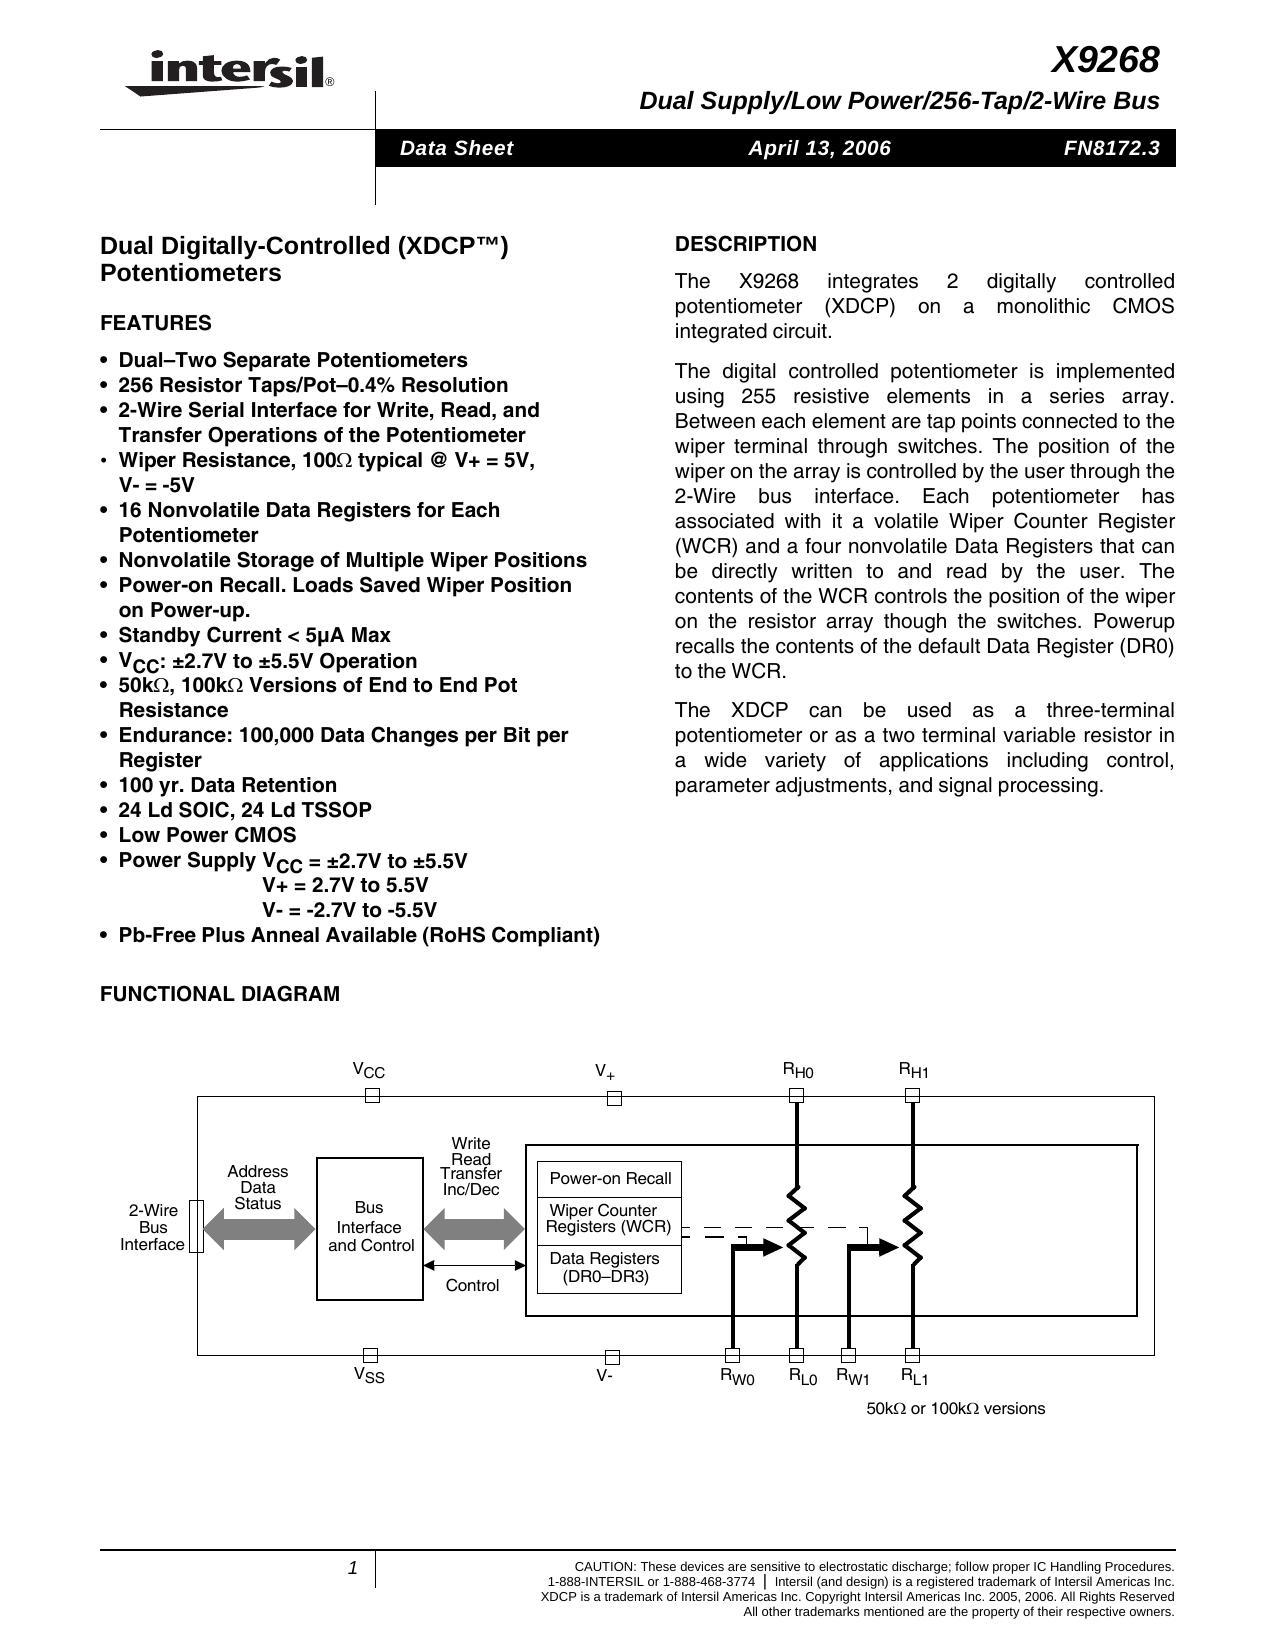 x9268-dual-supply-low-power256-tap2-wire-bus-dual-digitally-controlled-xdcp-potentiometers.pdf